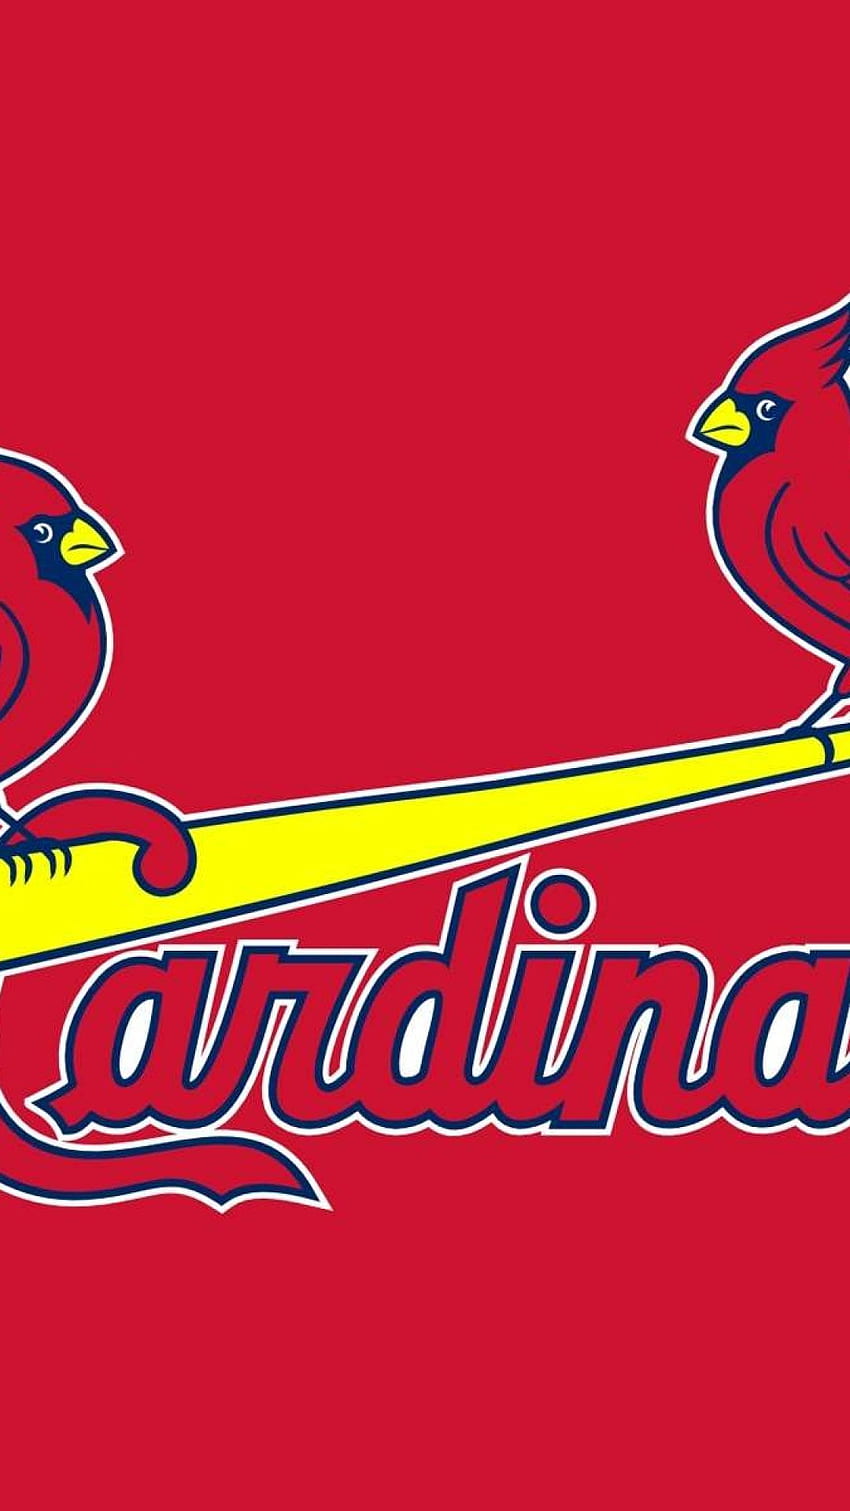 St louis Cardinals wallpaper by Pitin2017  Download on ZEDGE  ebe3